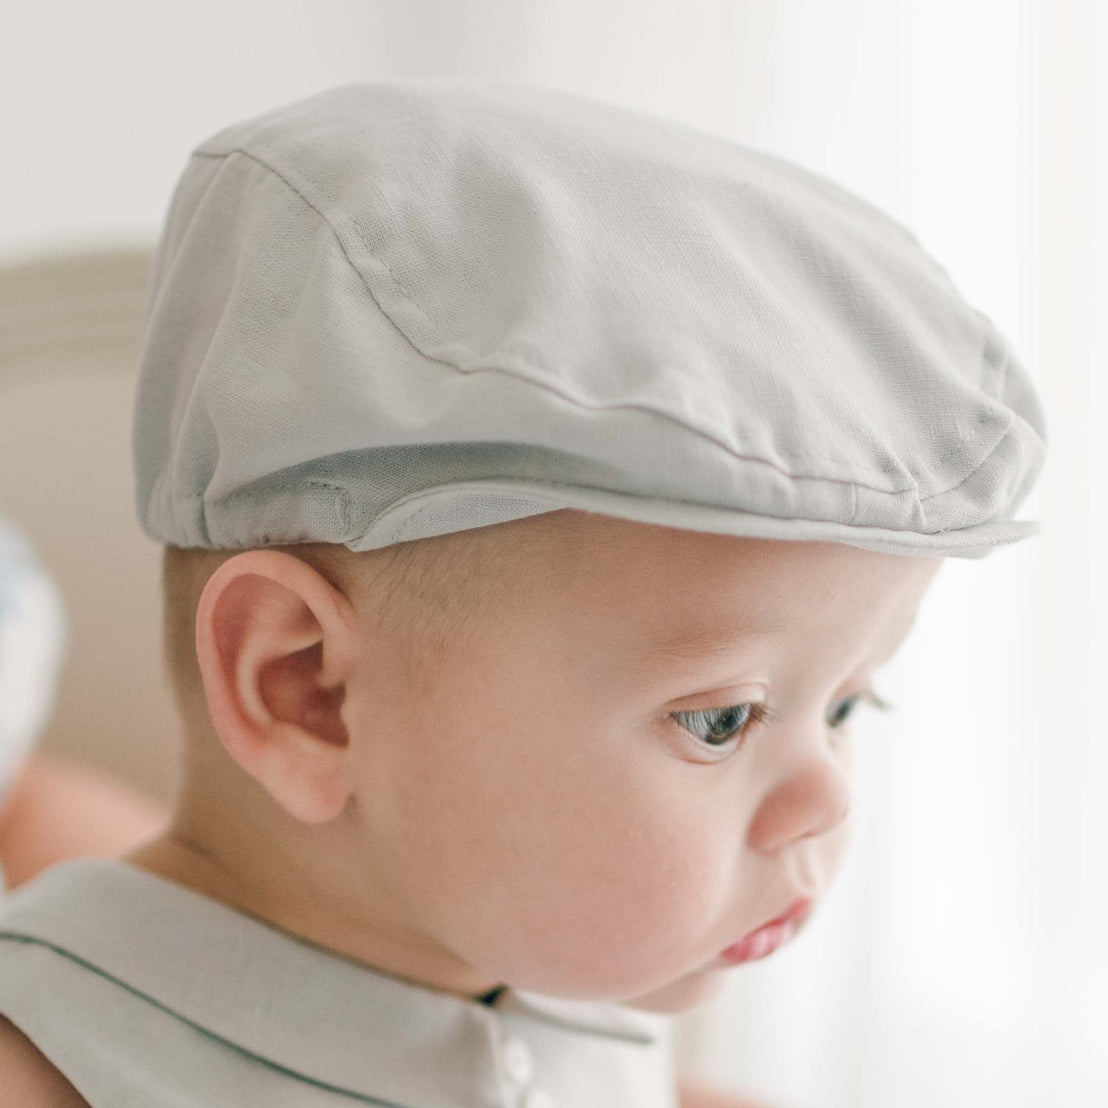 A baby wearing a Grayson Linen Newsboy Cap and the Grayson Linen Romper looks to the right. The background is softly blurred.